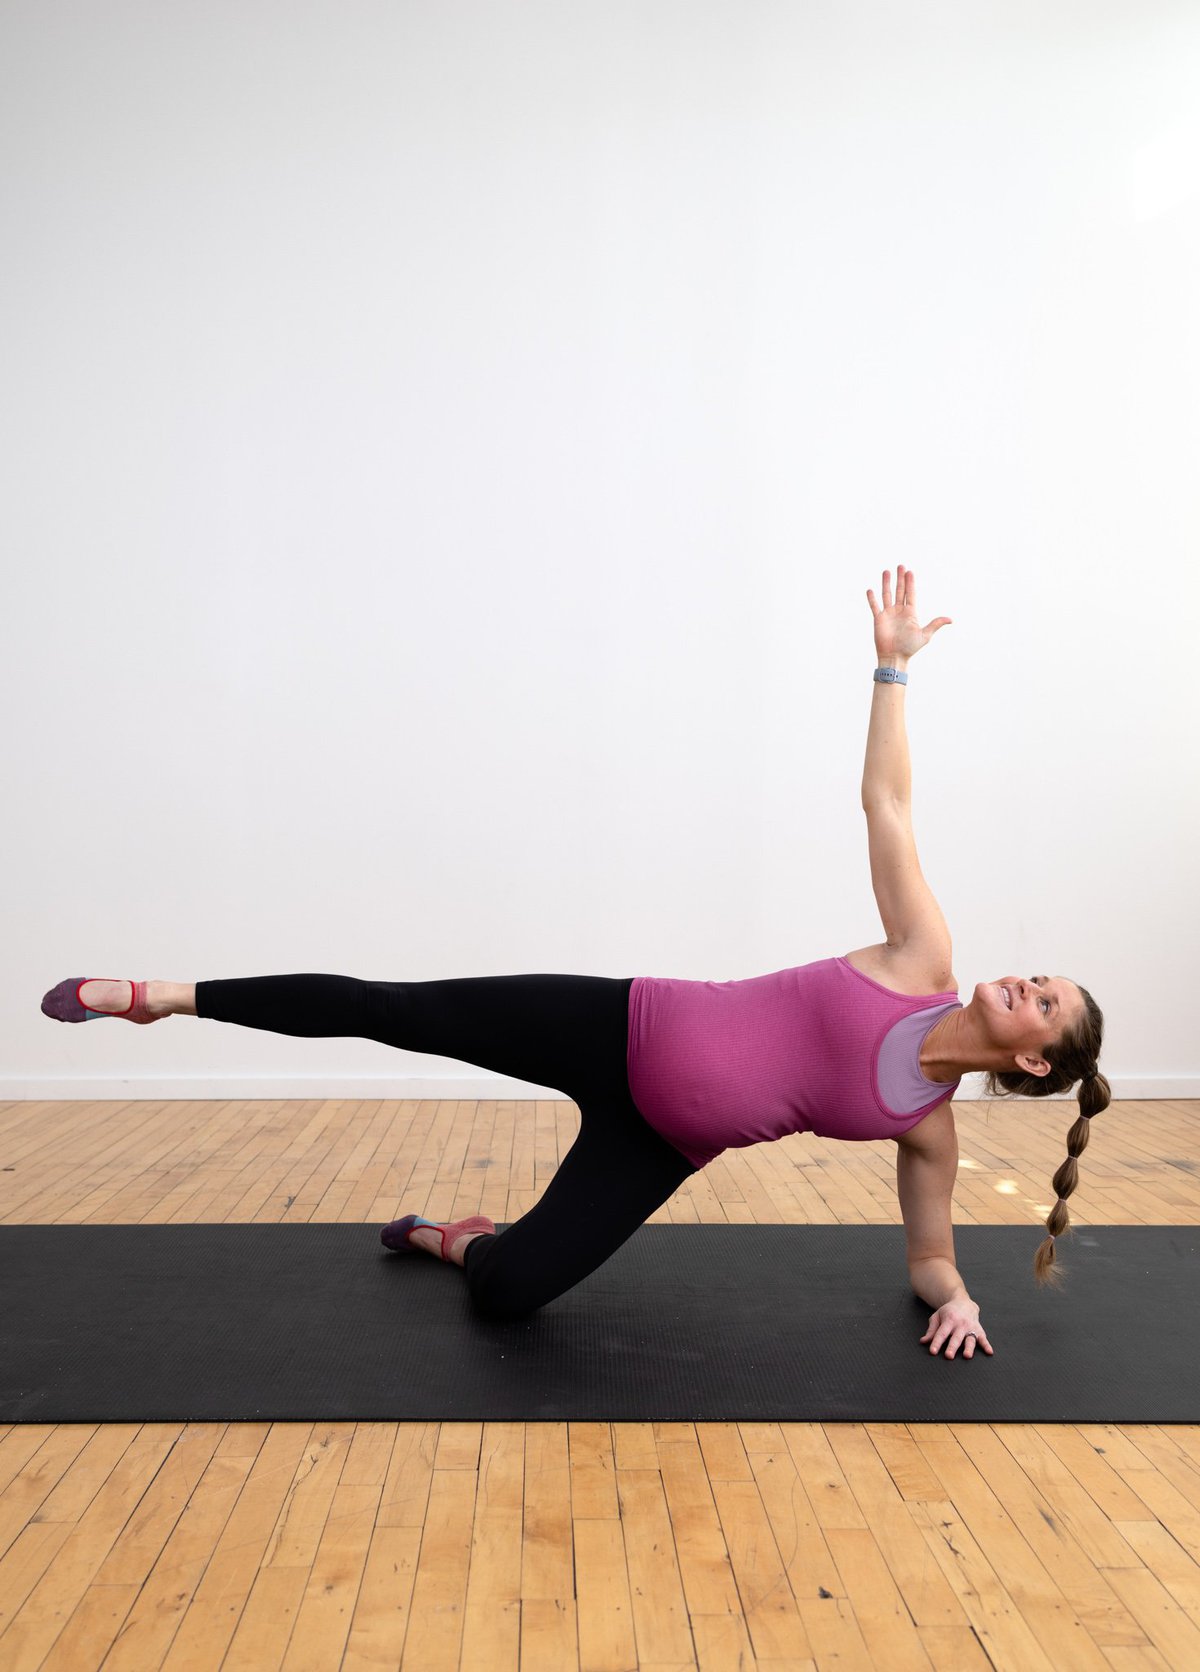 5 Pilates moves to strengthen and tone your arms.